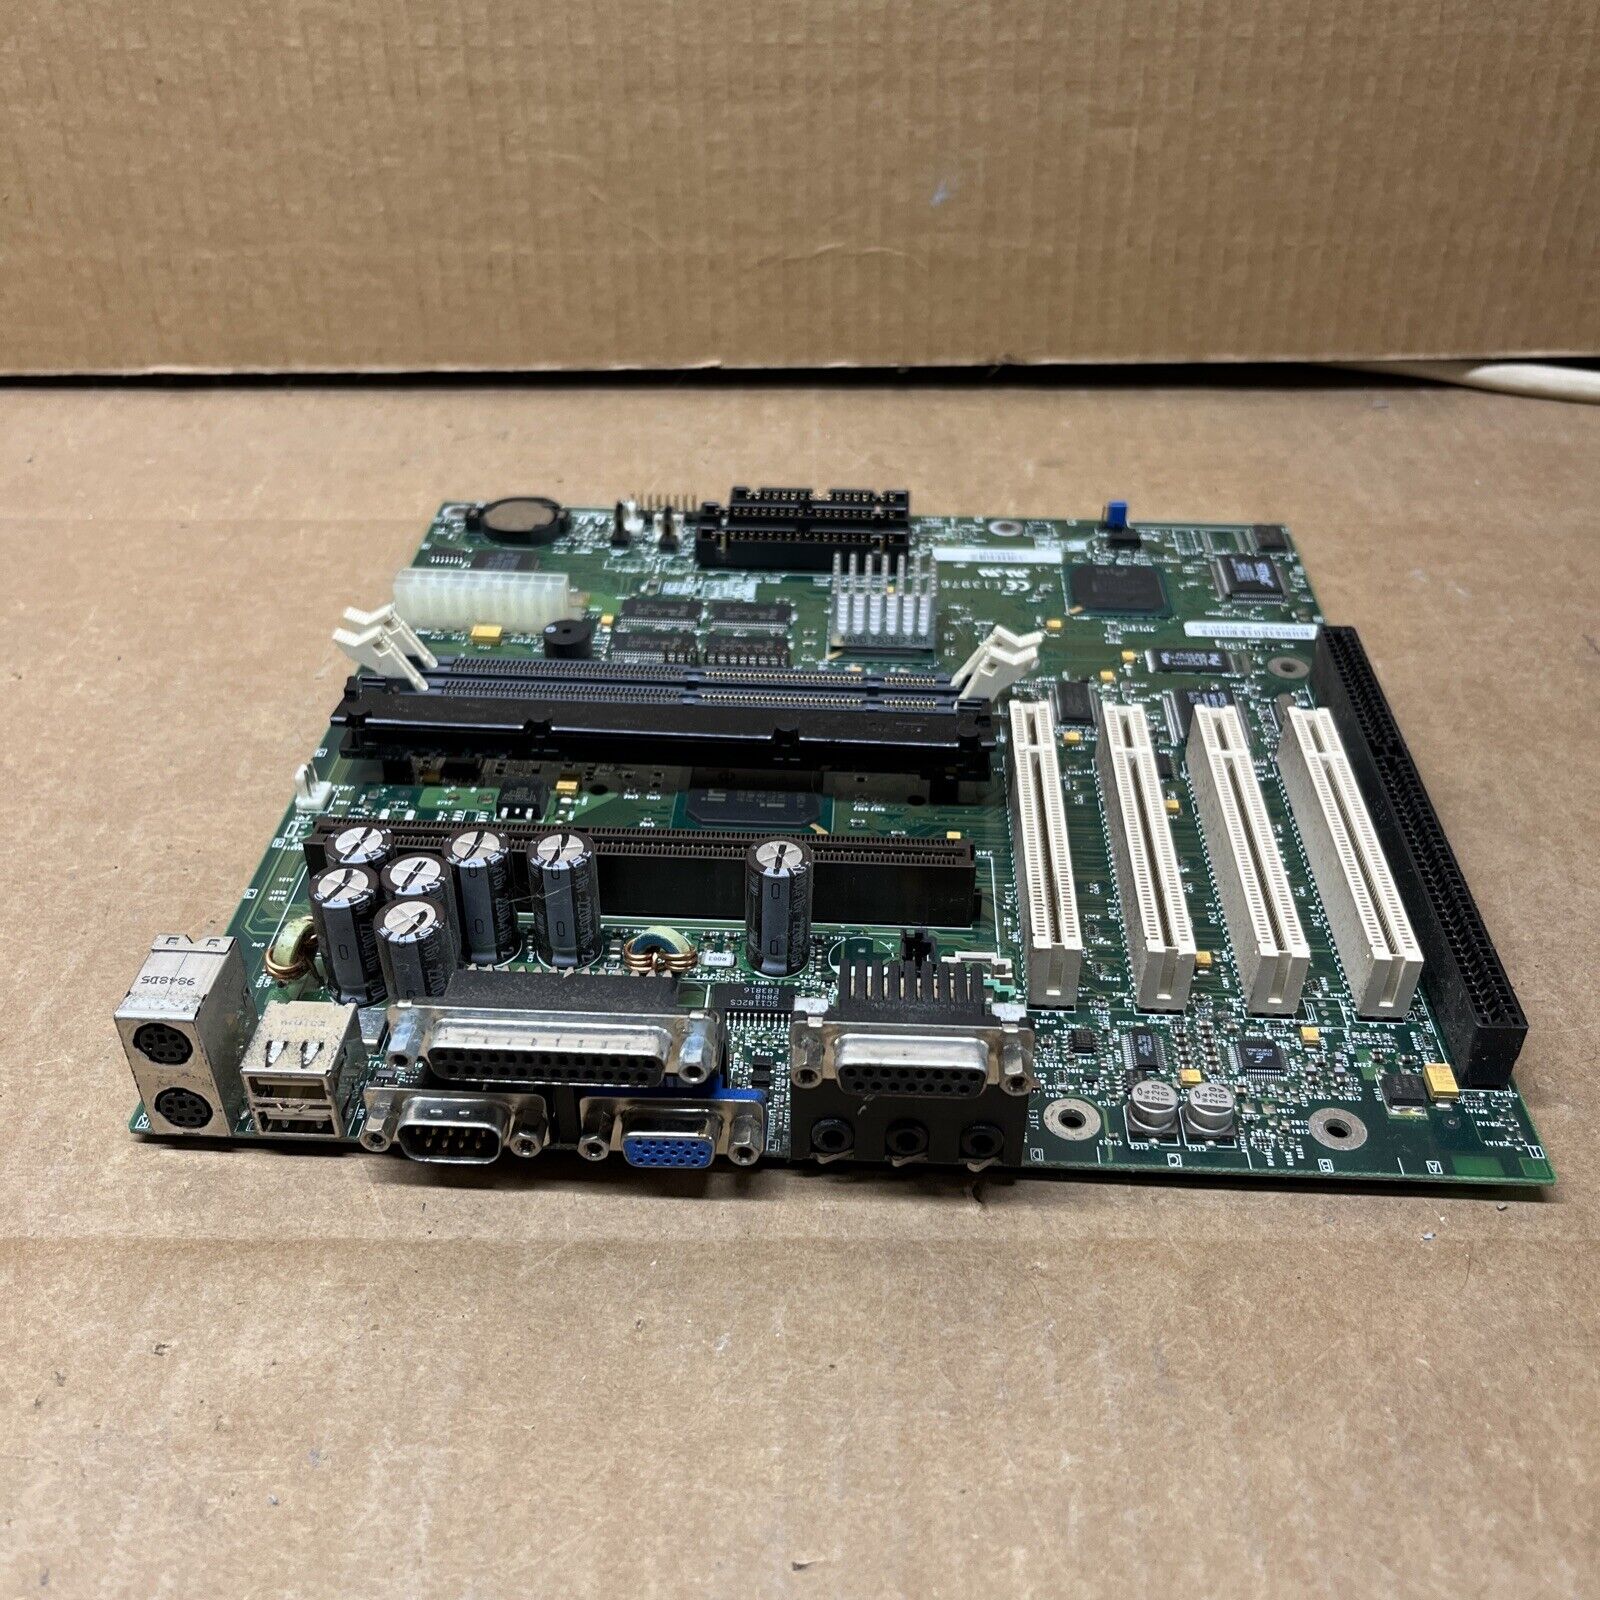 SLOT ONE MOTHERBOARD. SMALL FACTORY FORM